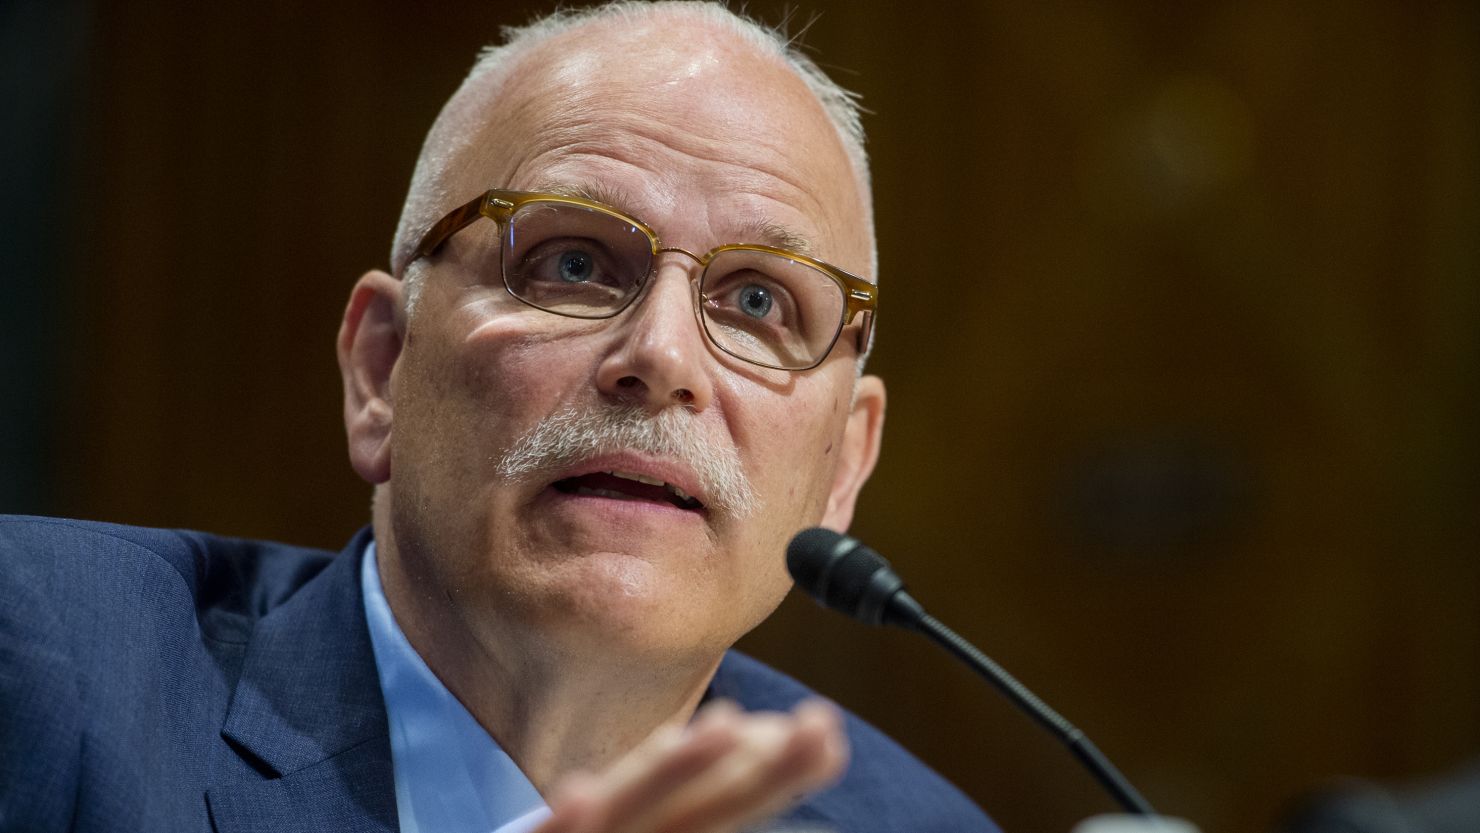 Chris Magnus appears at a Senate Finance Committee hearing to consider his nomination to be commissioner of US Customs and Border Protection on October 19, 2021, in Washington.